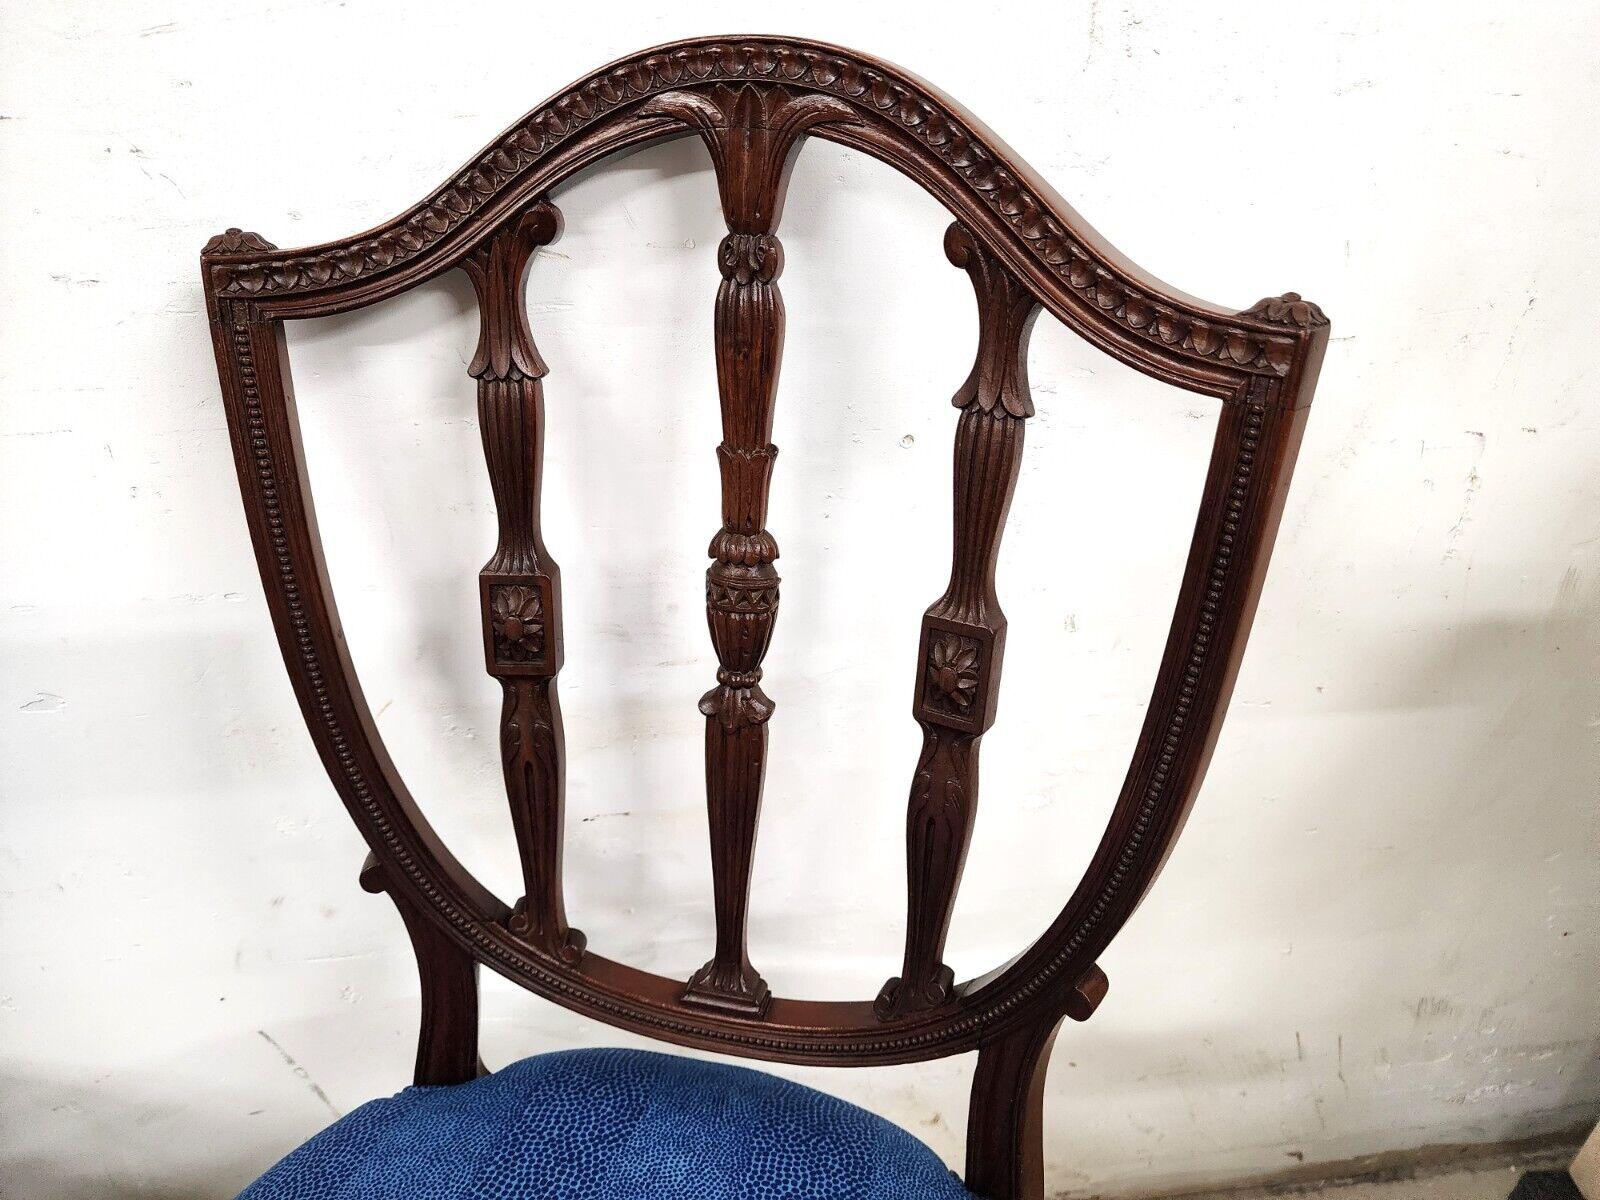 For FULL item description click on CONTINUE READING at the bottom of this page.

Offering one of our recent palm beach estate fine furniture acquisitions of a
set of 2 antique 1800s George III accent side chairs shield back mahogany